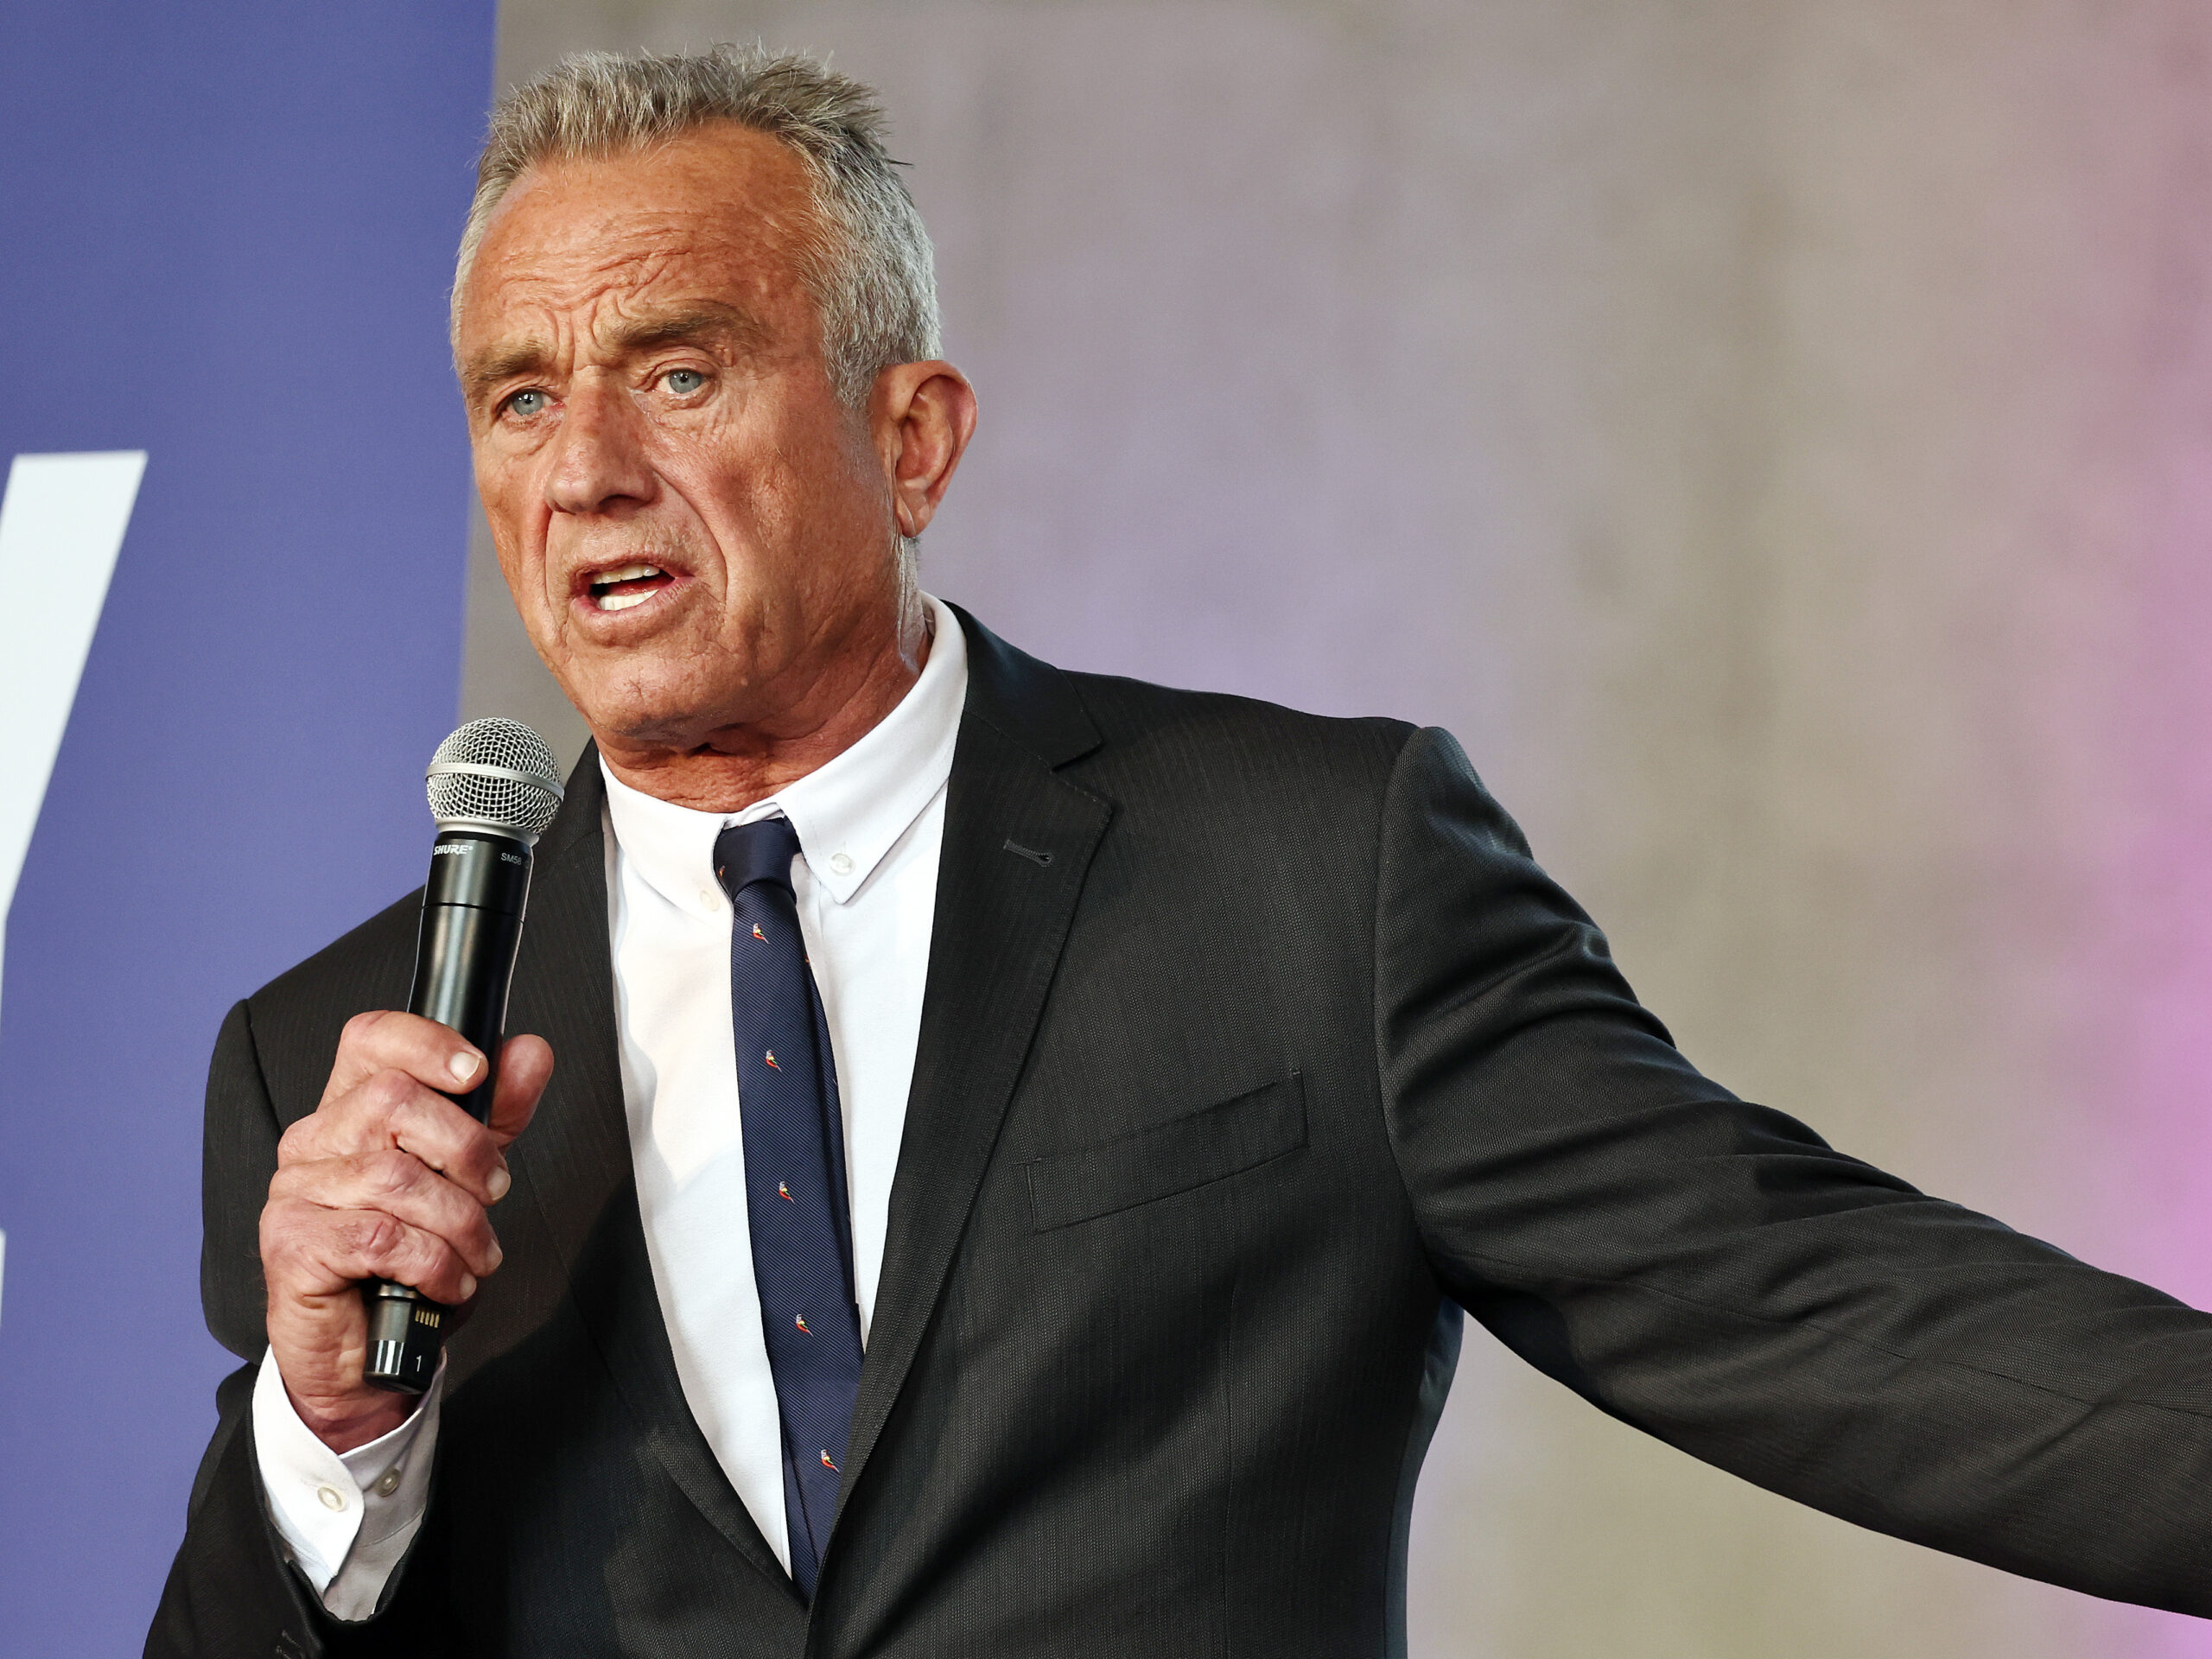 Independent presidential candidate Robert F. Kennedy Jr. speaks at an event in Los Angeles on March 30.